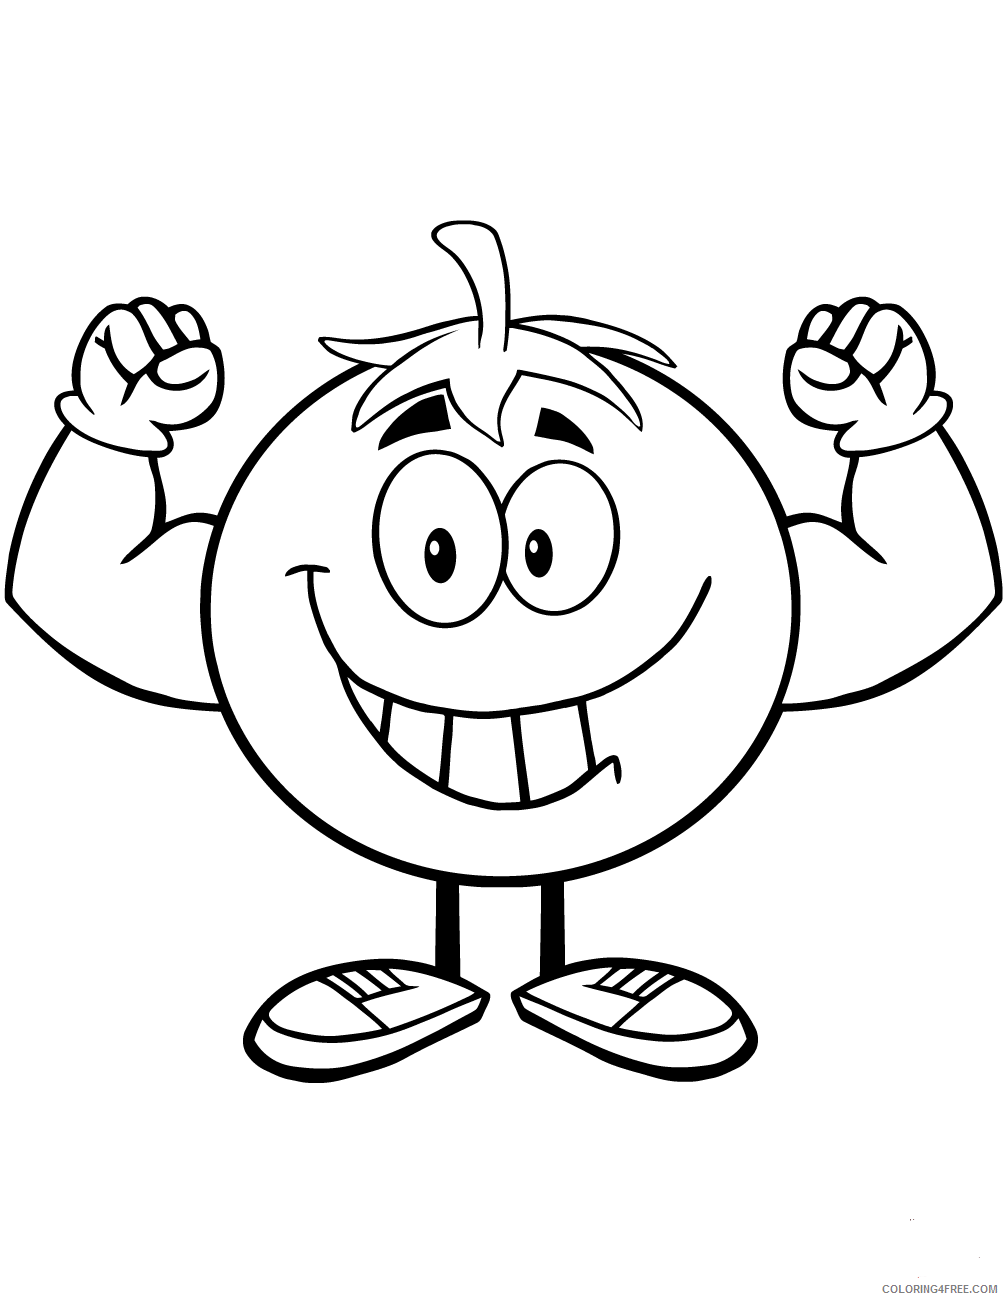 Tomato Coloring Pages Vegetables Food strong cartoon mascot character 2021 Coloring4free